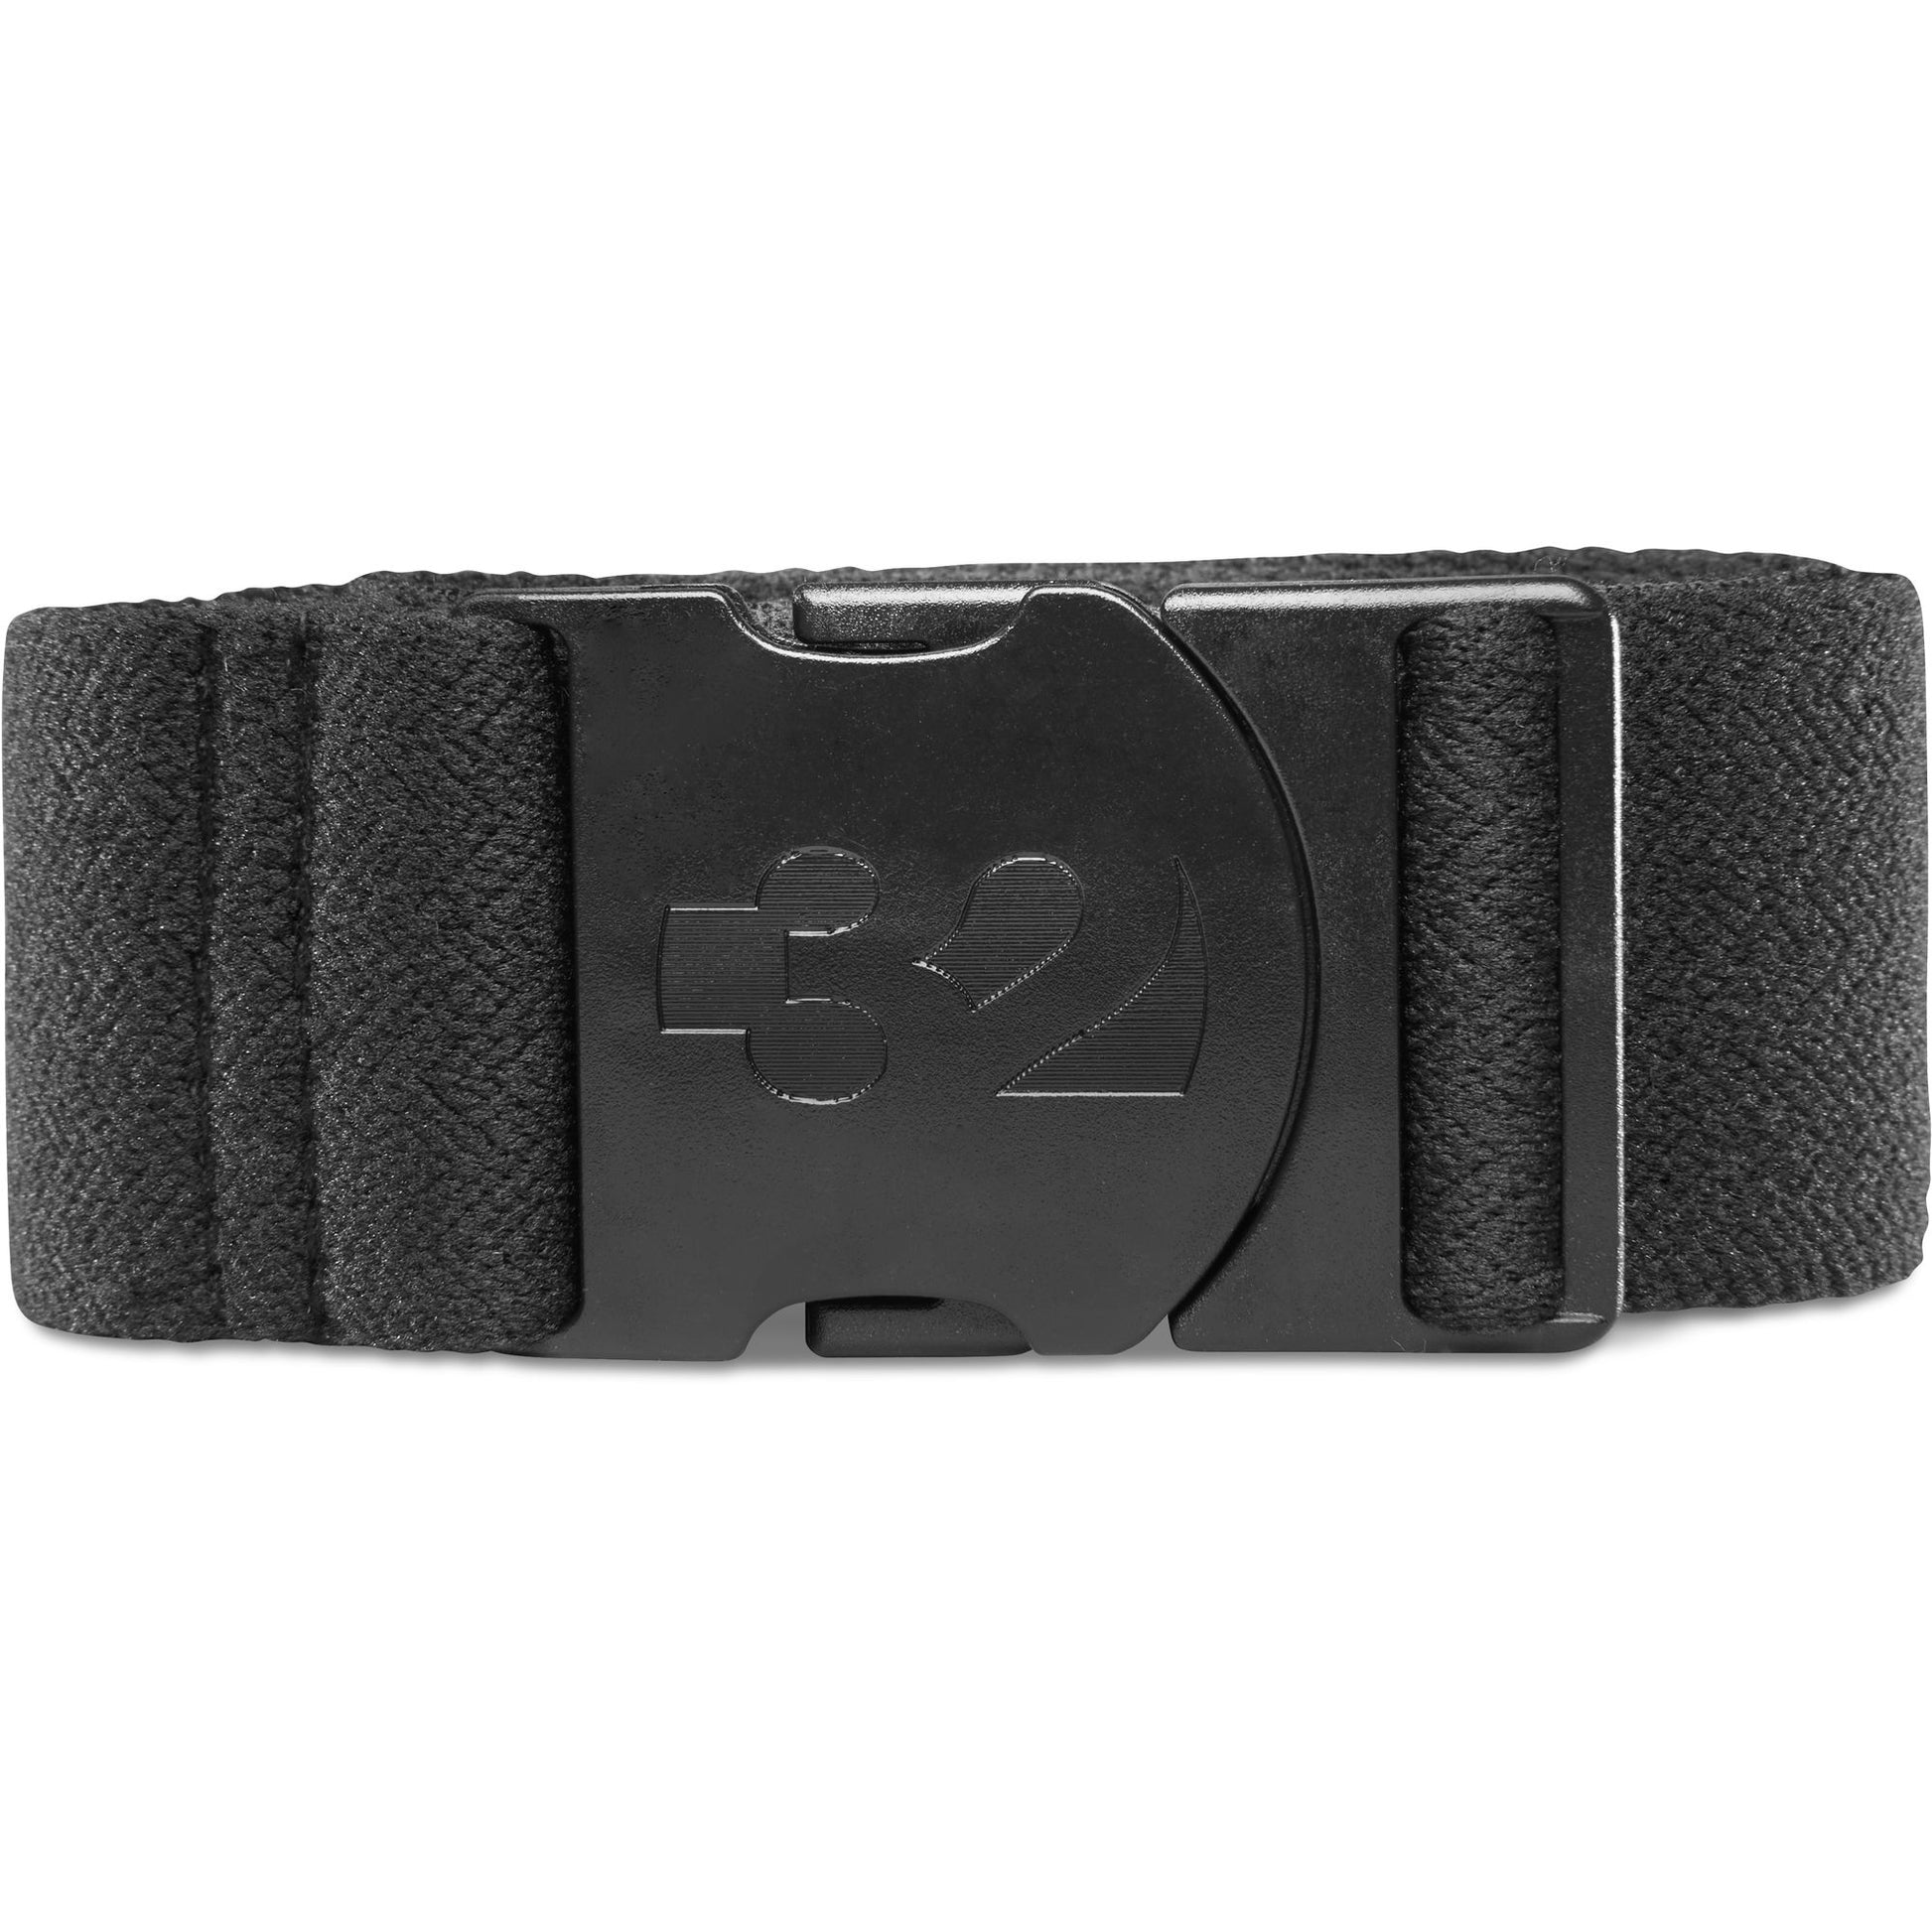 ThirtyTwo Cut-Out Belt Accessories